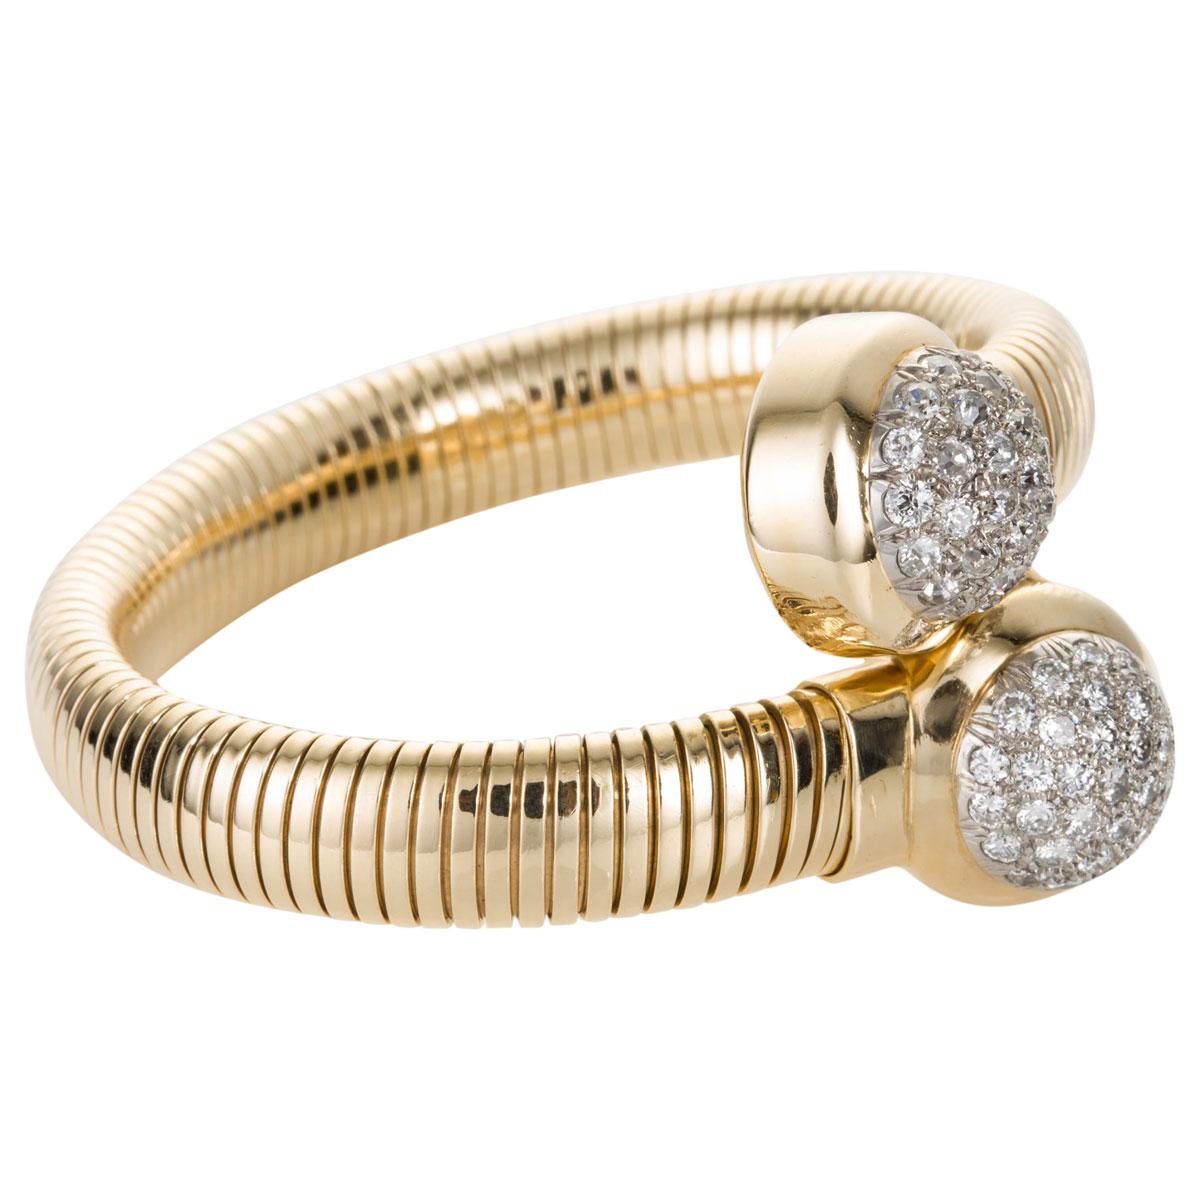 Seaman Schepps known as 'America's Court Jeweler' and established in 1904, make the most stylish and sophisticated pieces and this bangle is no exception. Featuring the amazing Tubogas work it is flexible and so comfortable to wear, 14k yellow gold